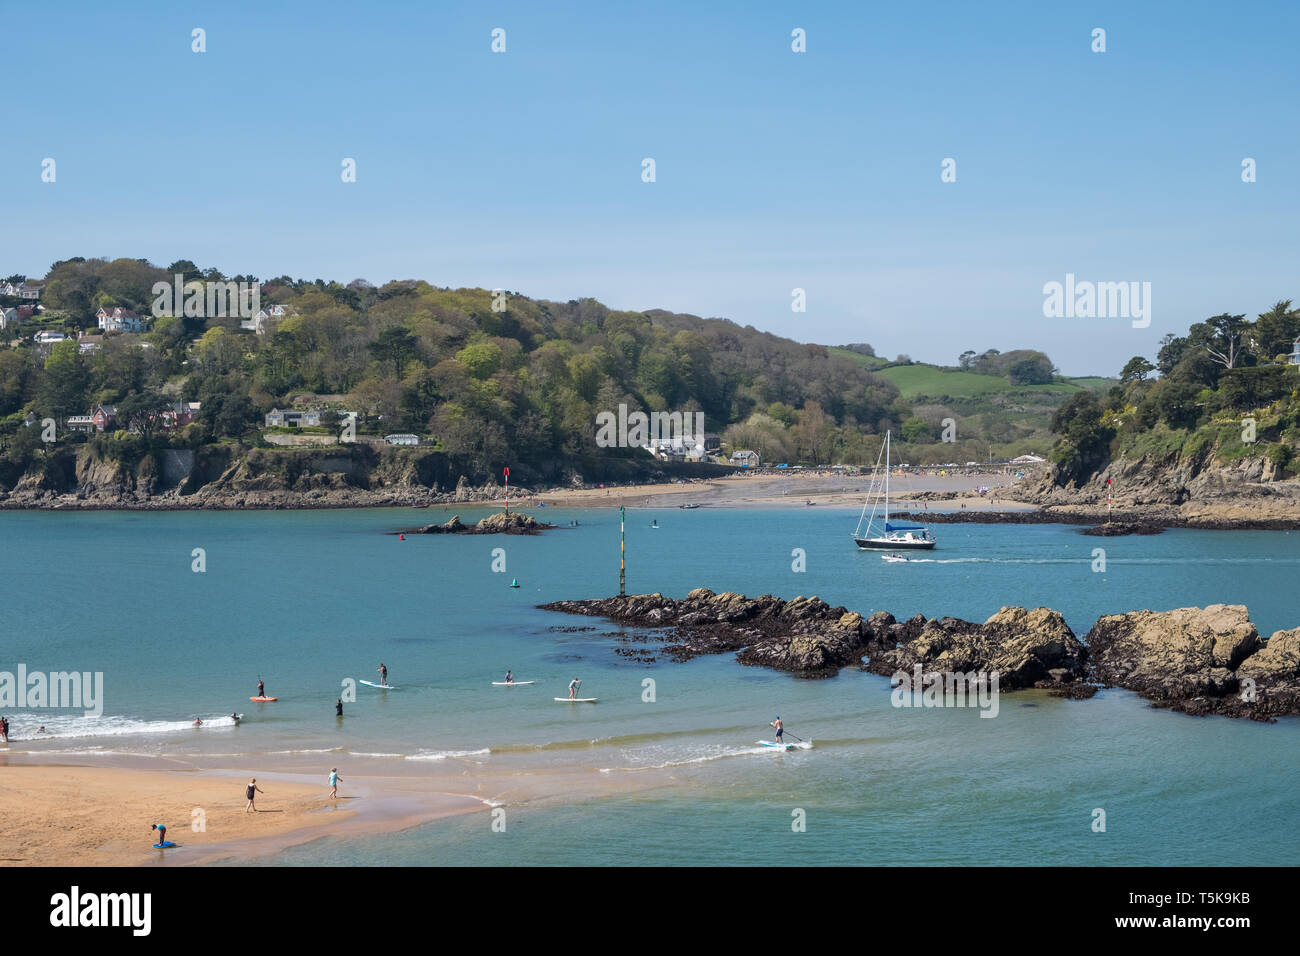 Exposed rocks at low tide at the entrance to the Salcombe estuary with North Sands in the background, South Hams, Devon, UK Stock Photo